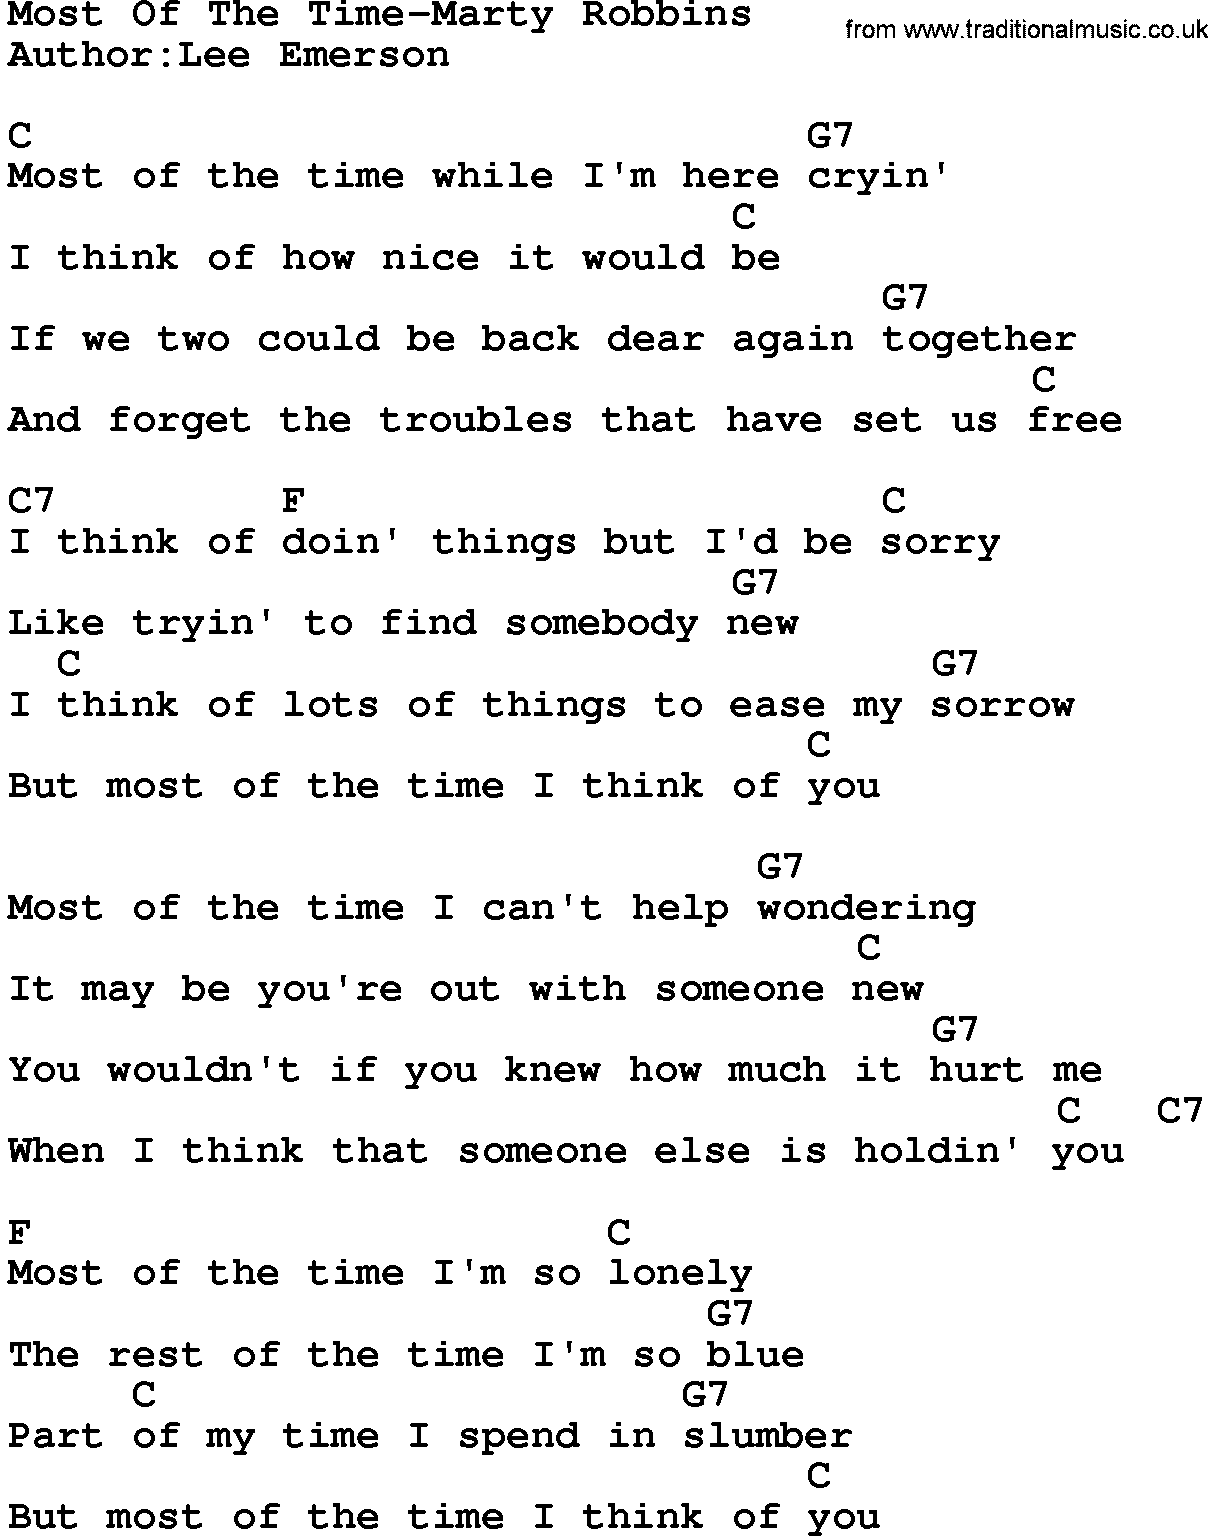 Country music song: Most Of The Time-Marty Robbins lyrics and chords